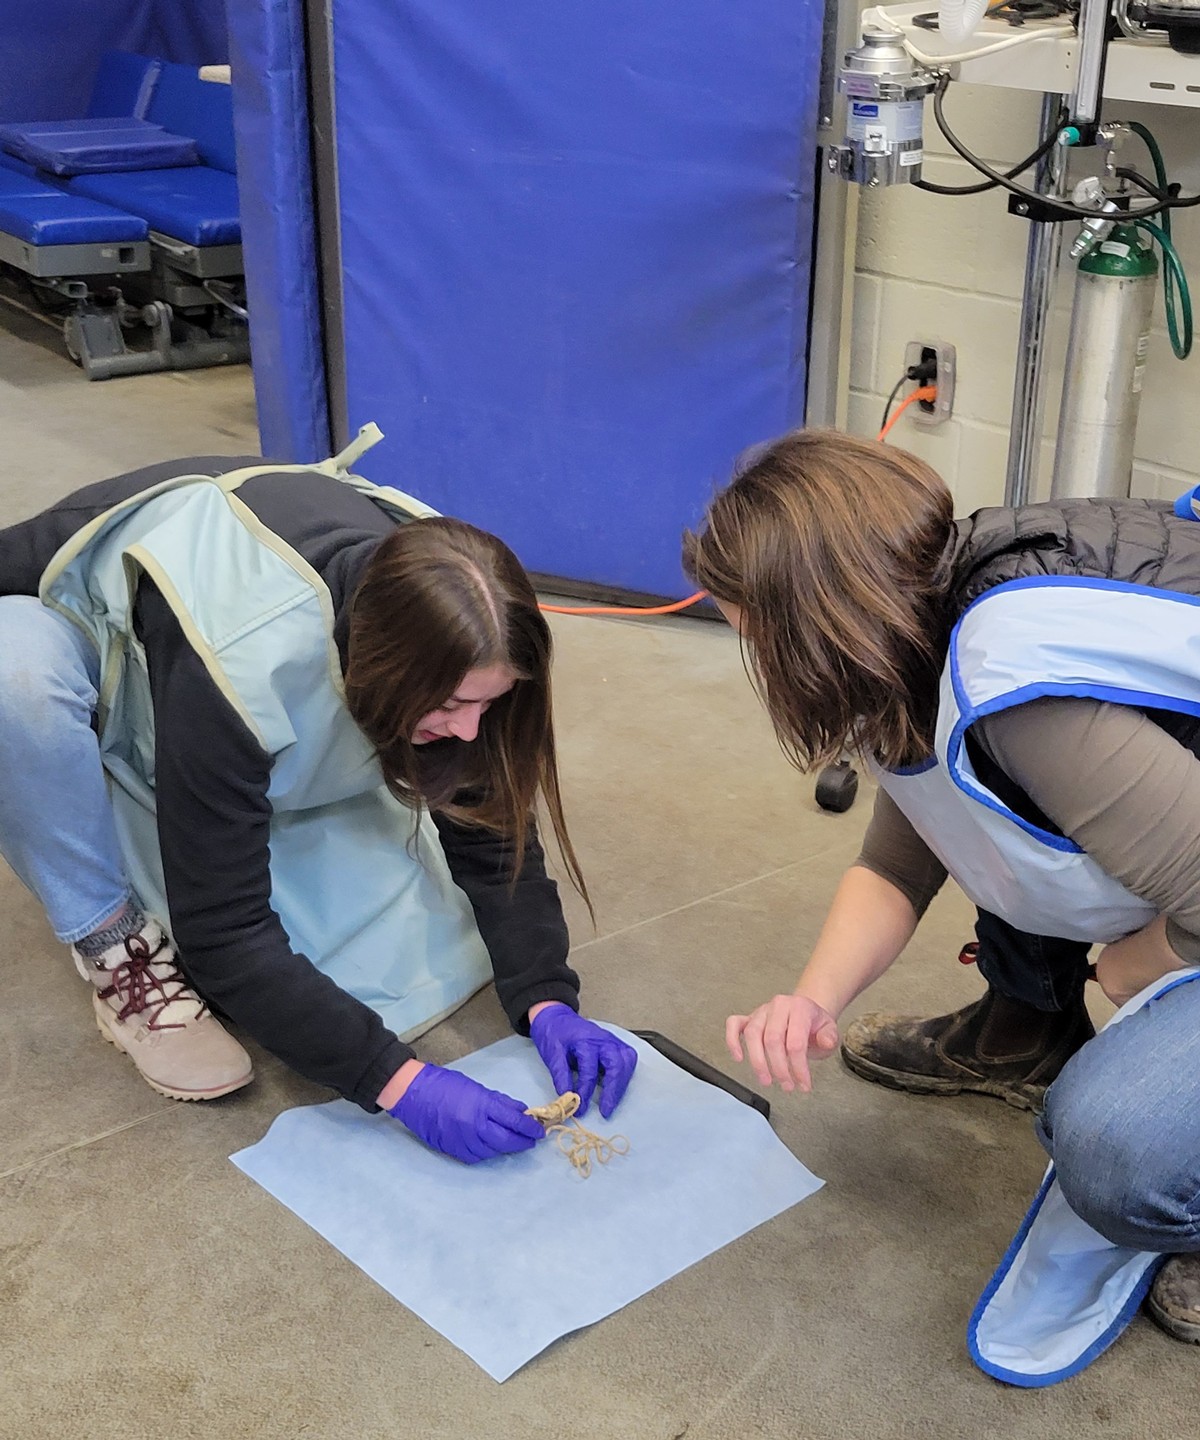 two people crouch by an X-ray tray as one arranges a small animal-skin pouch upon it.